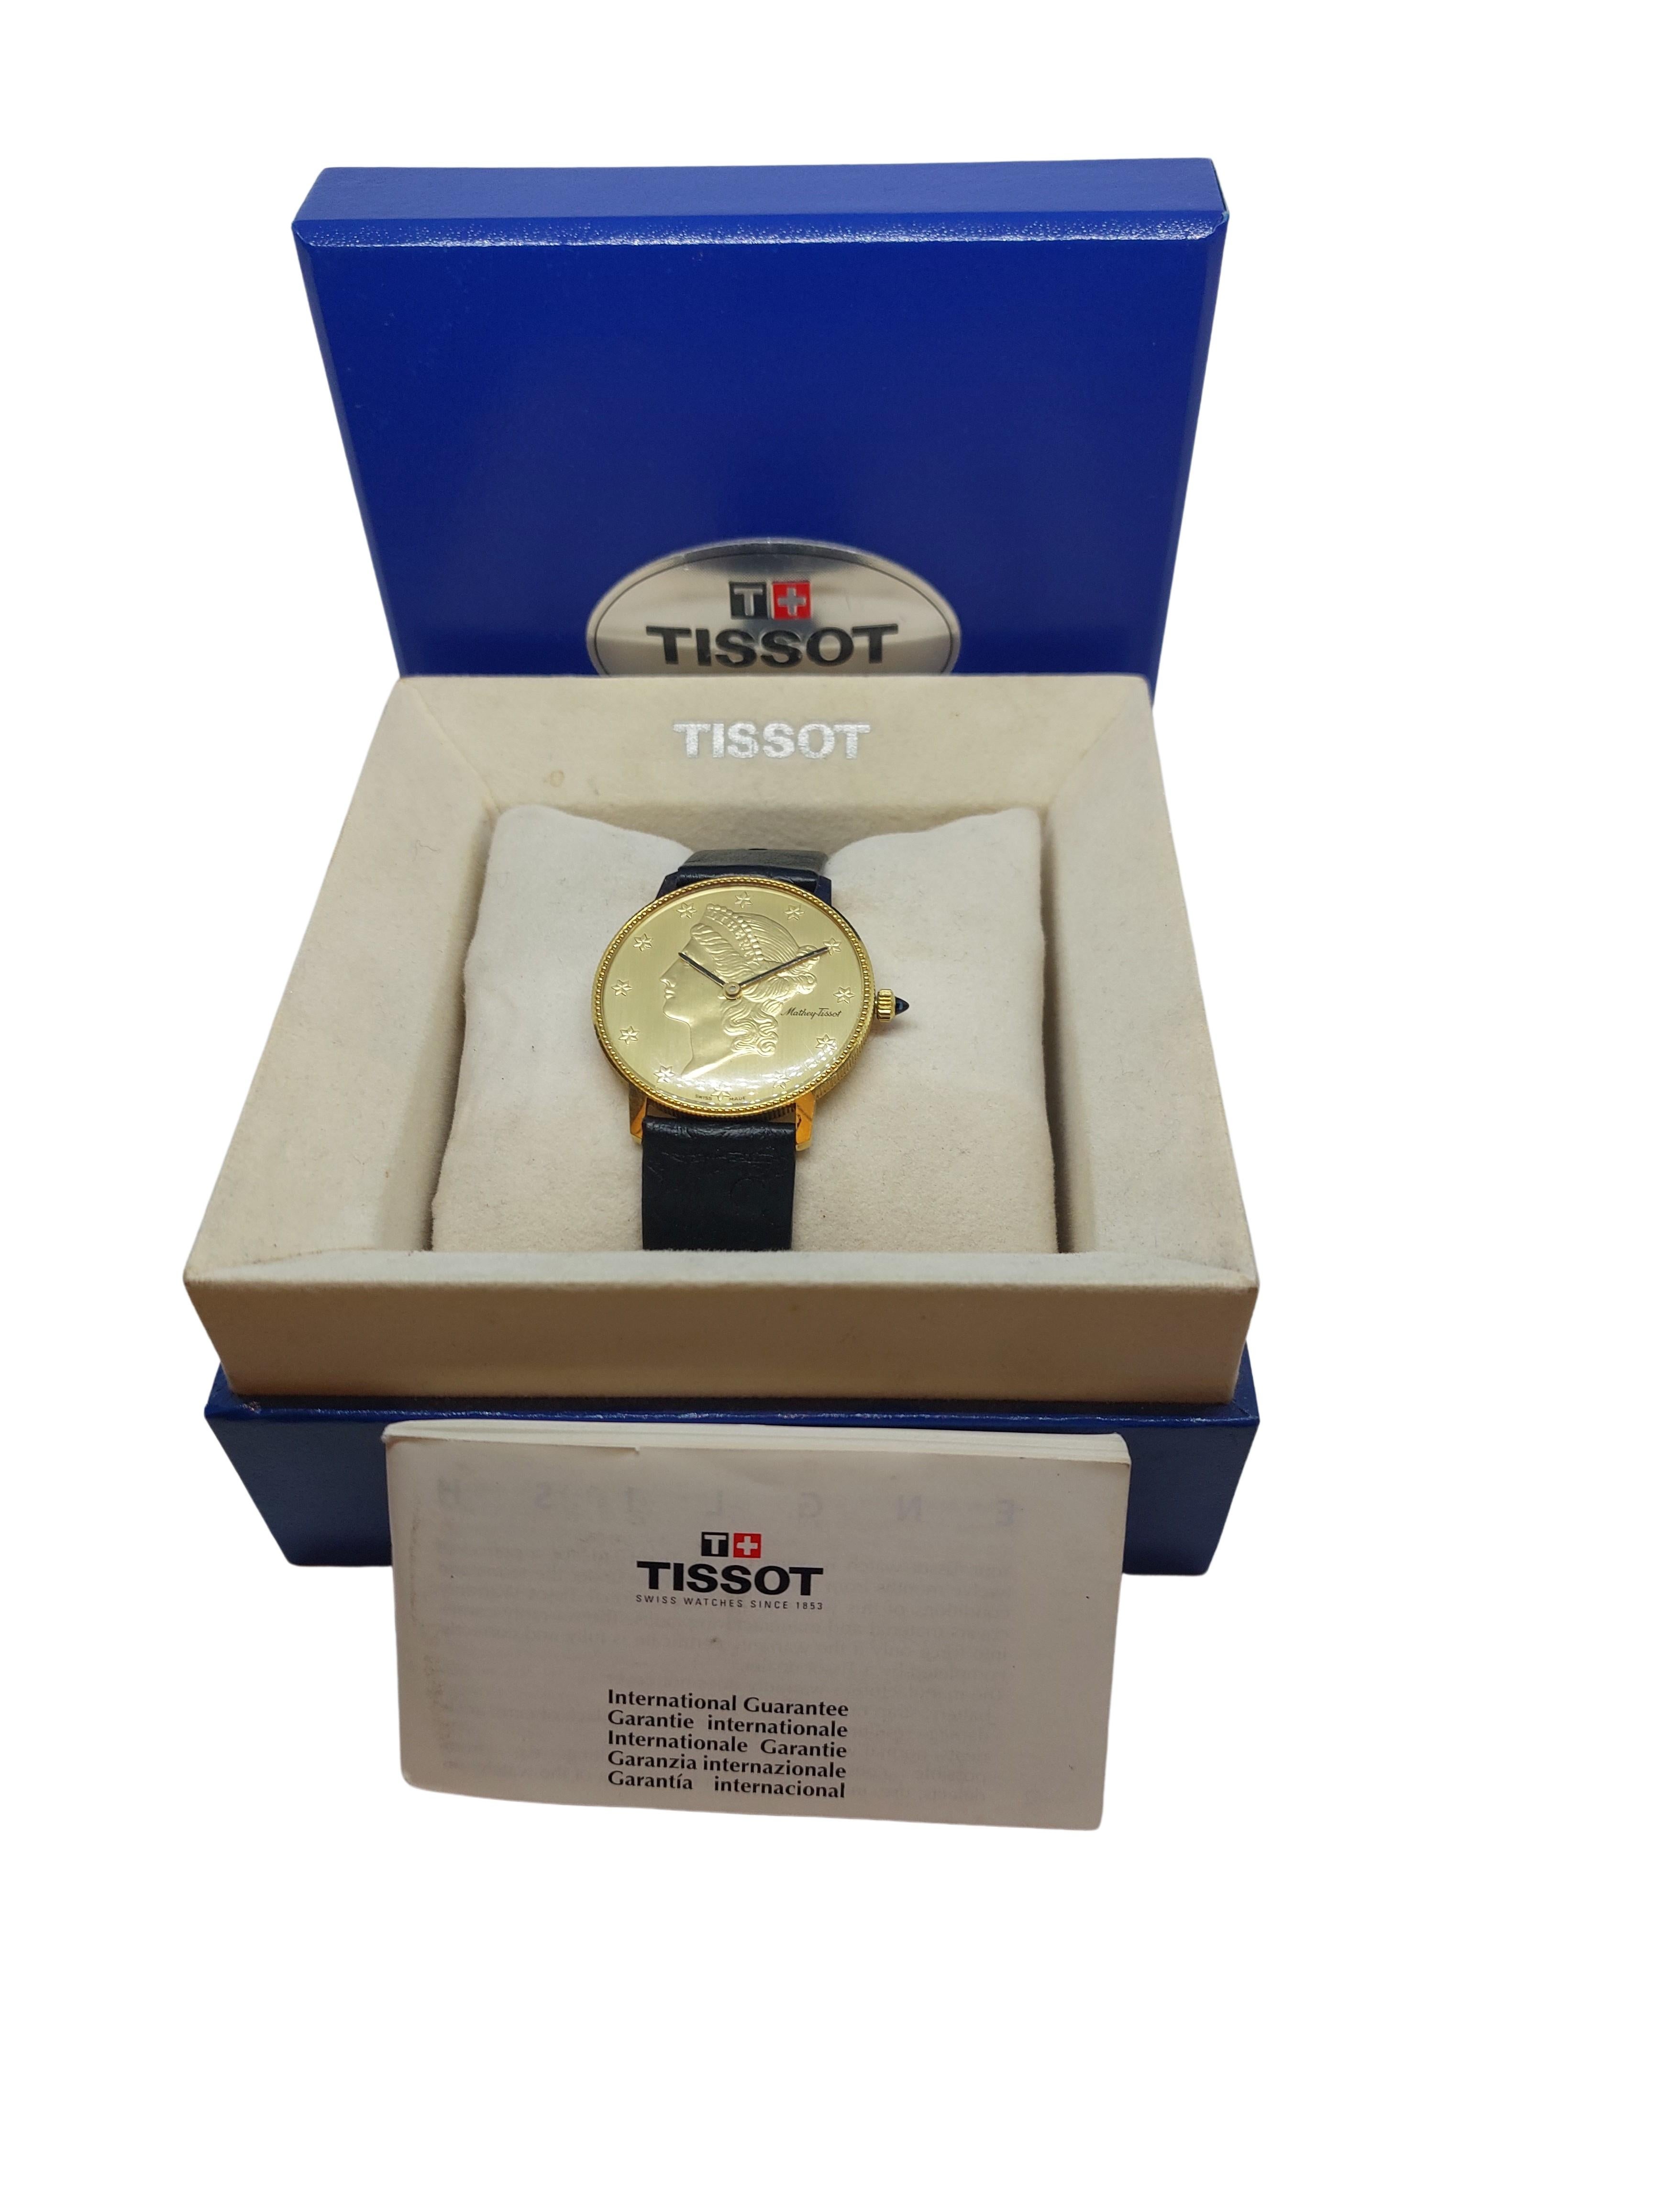 Mathey Tissot 18 Kt Gold Liberty Coin Watch, Mechanical Movement, with Box For Sale 12